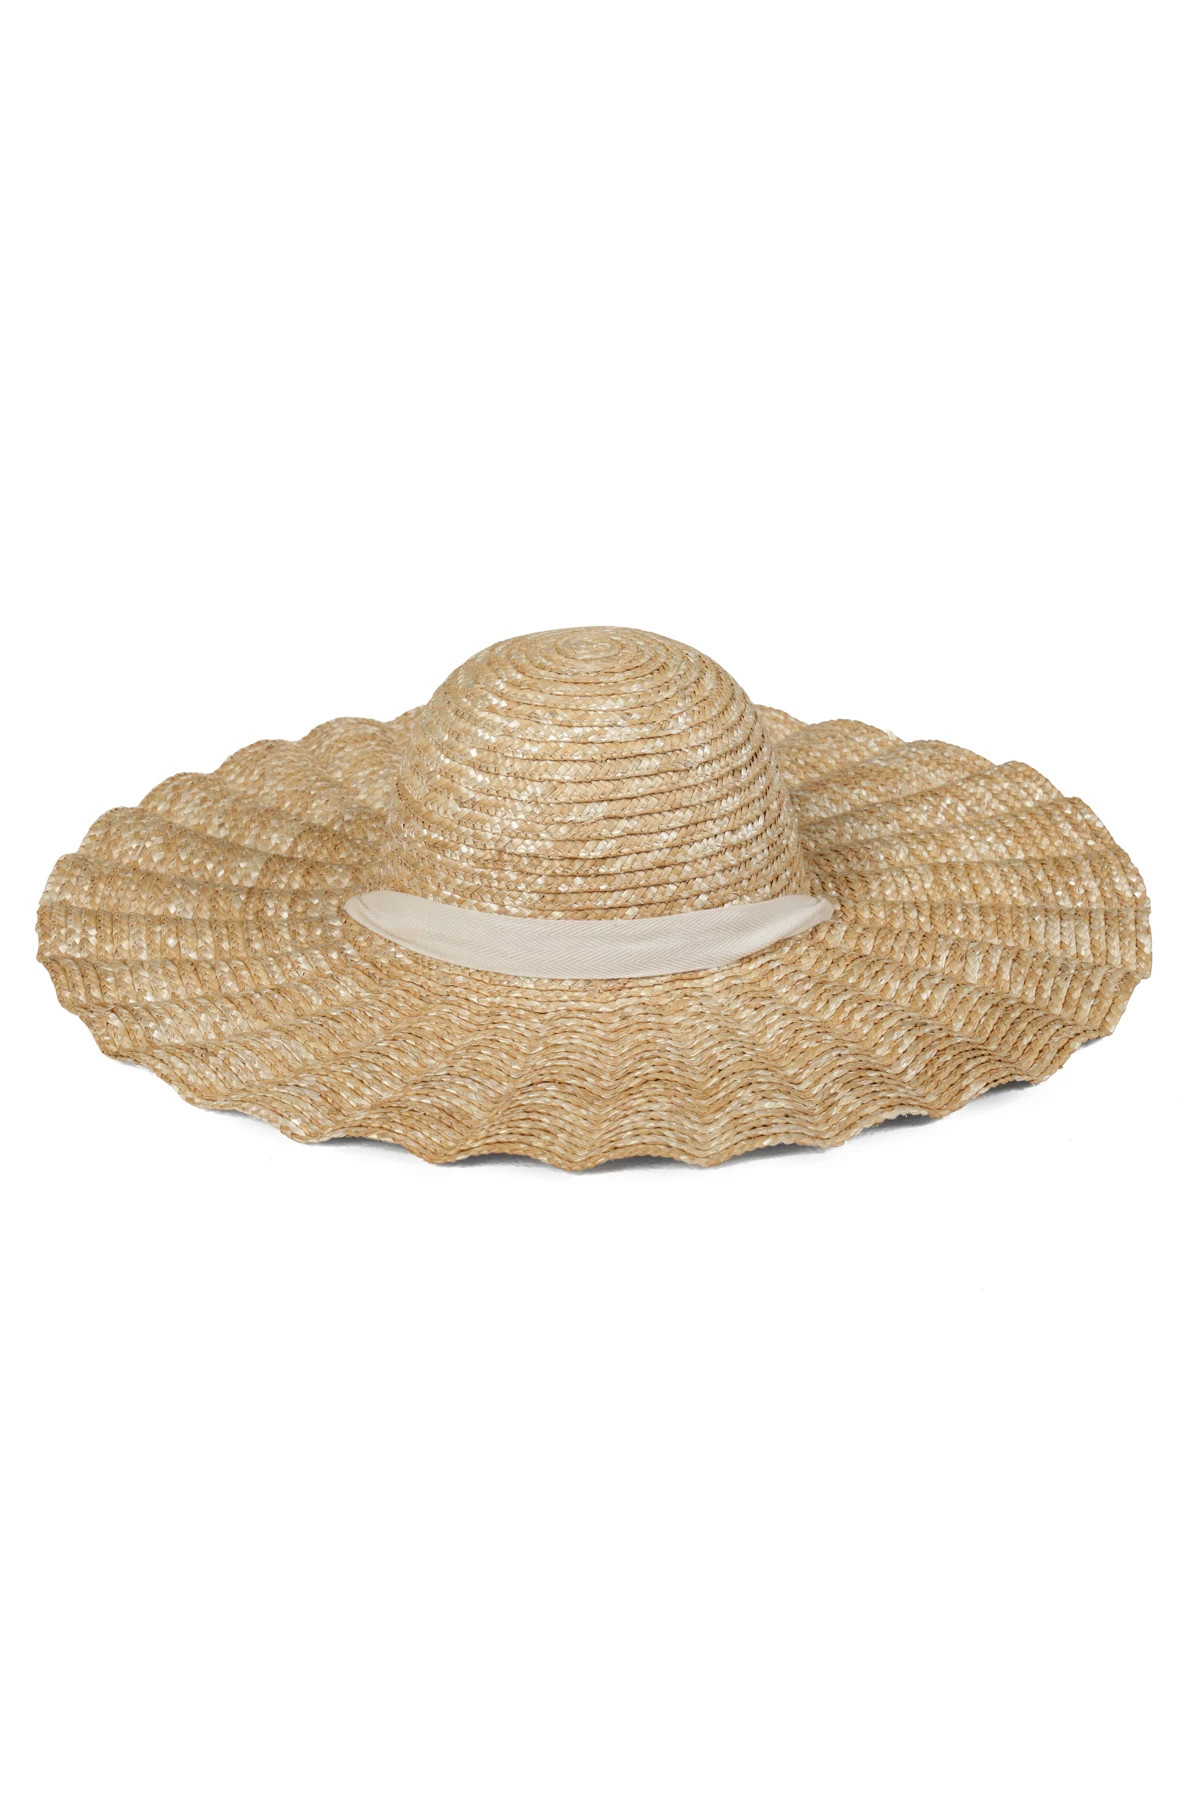 NATURAL Scalloped Dolce Sun Hat image number 1